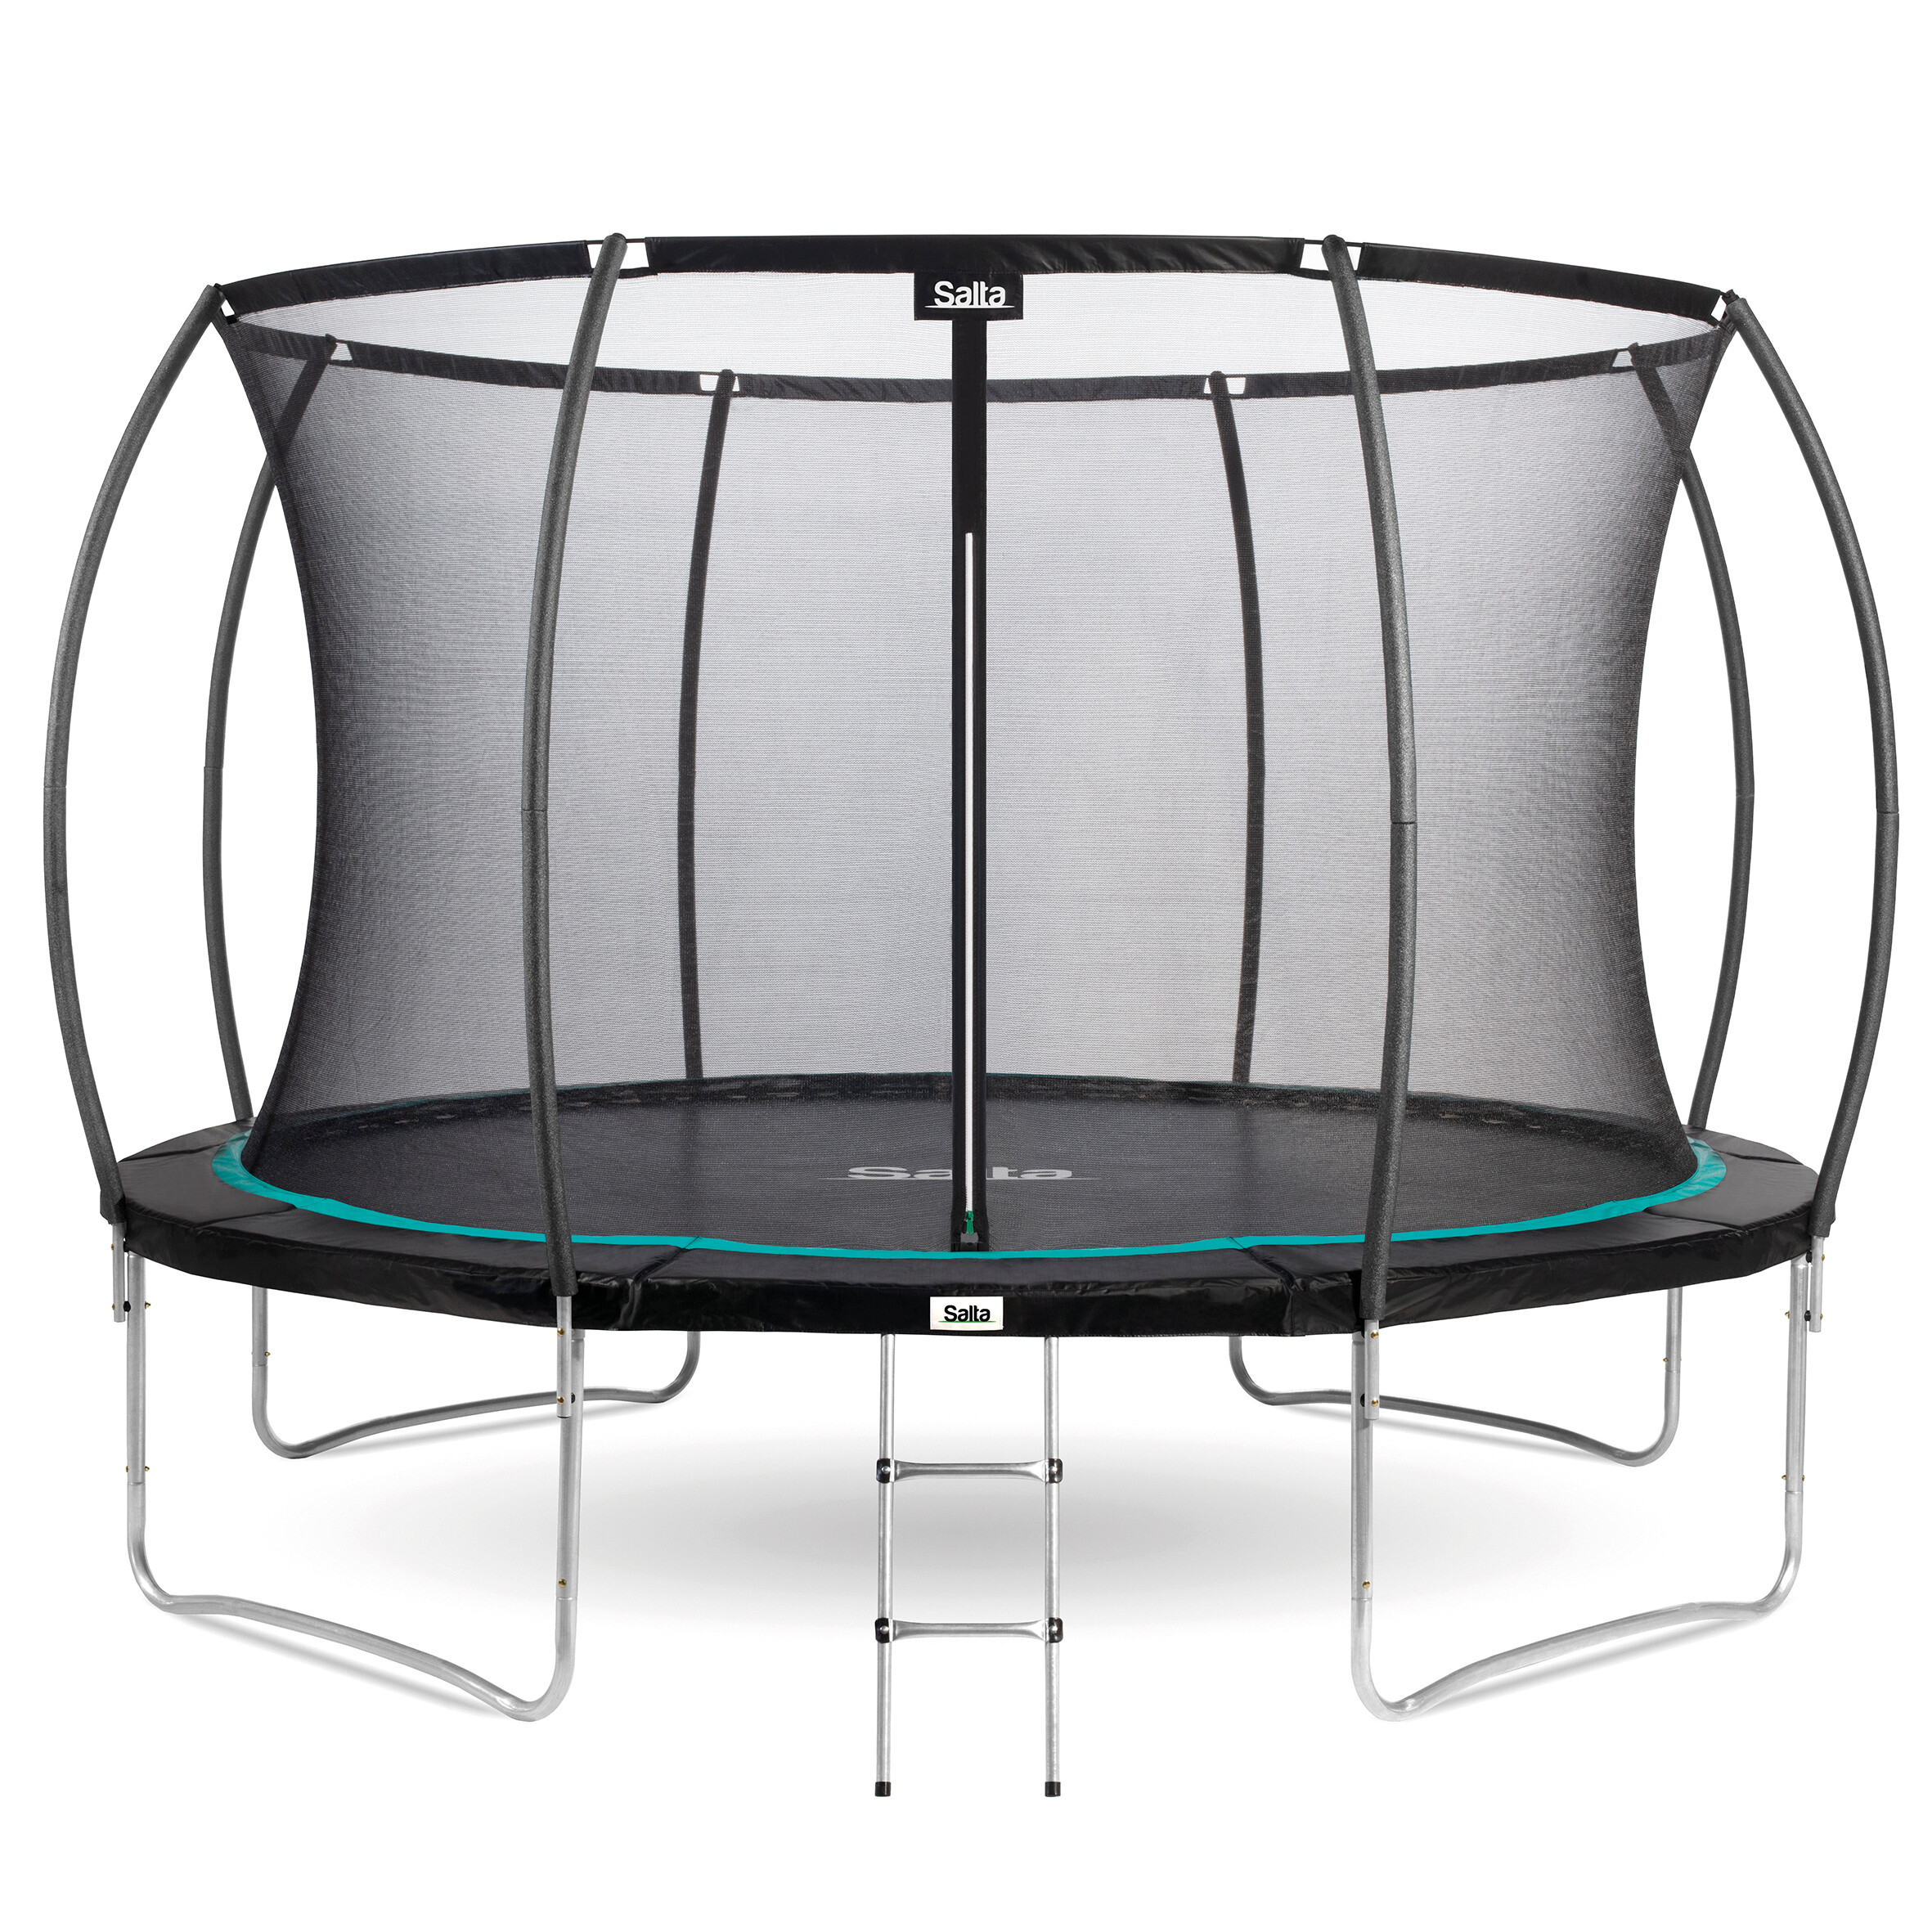 Trampoline Cosmos Ø427 cm, incl. ladder and safety